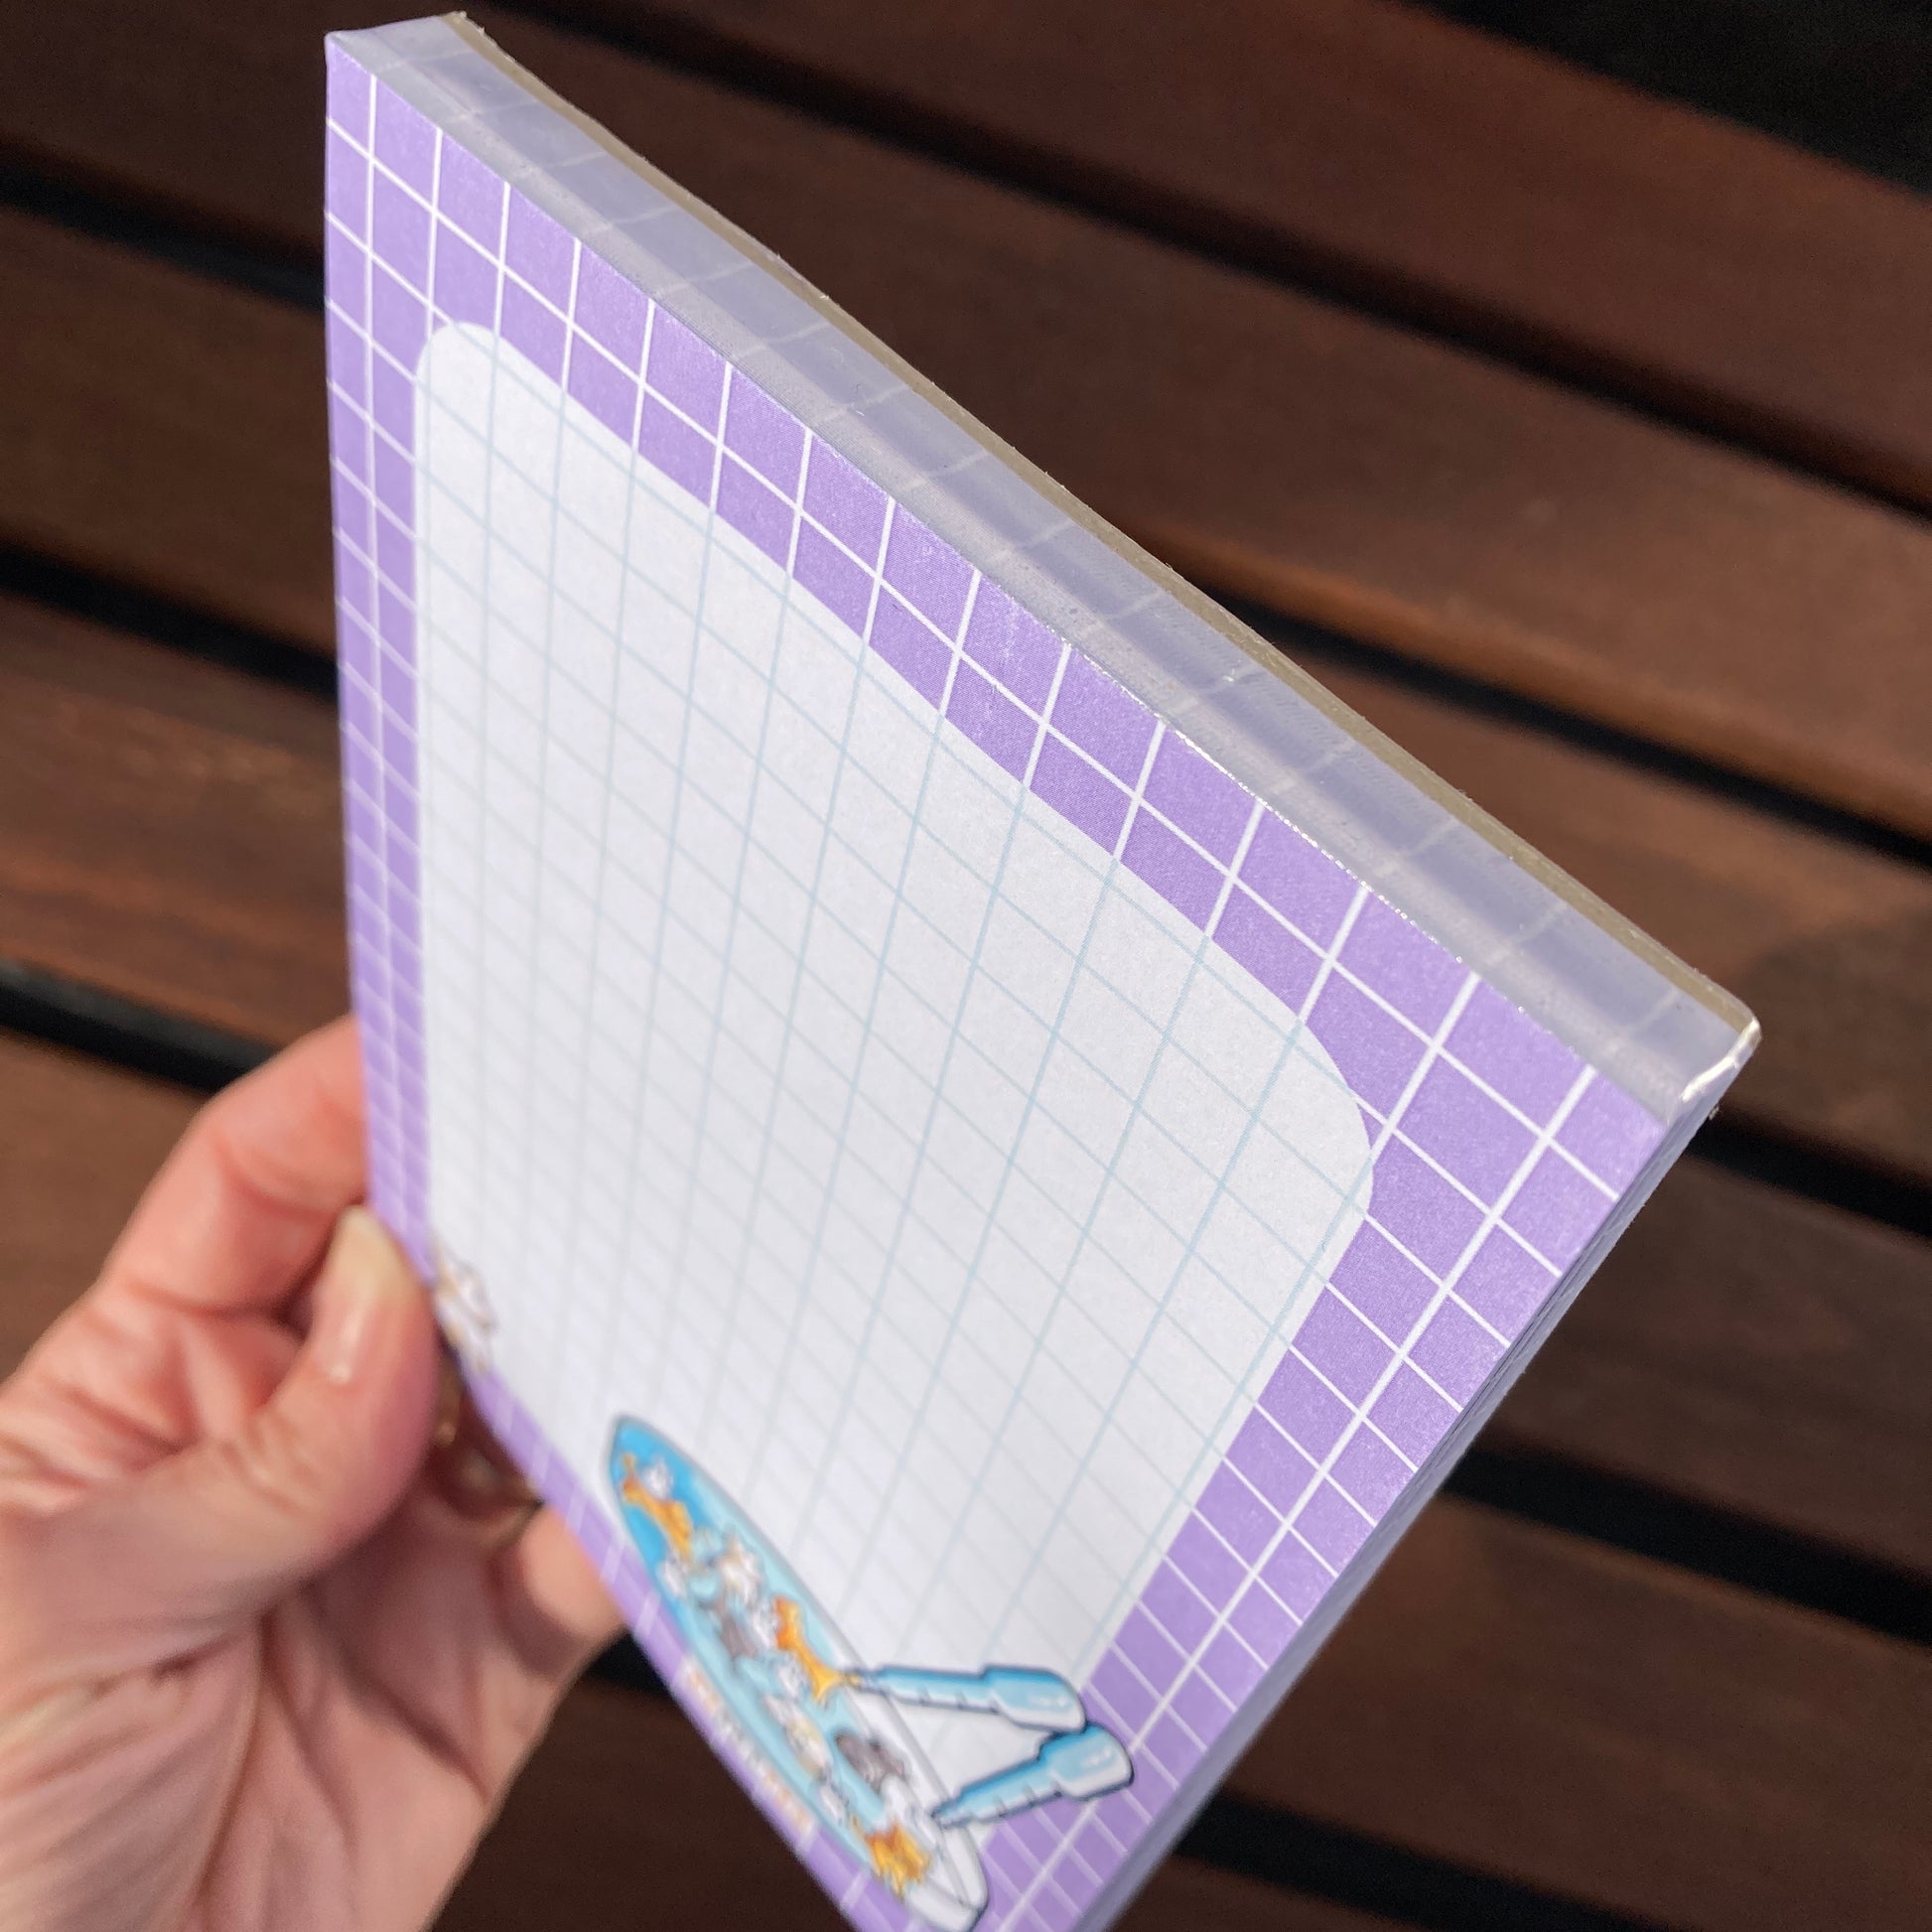 A hand holding the notepad at an angle to show the short top glued edge and a side edge of the notepad.